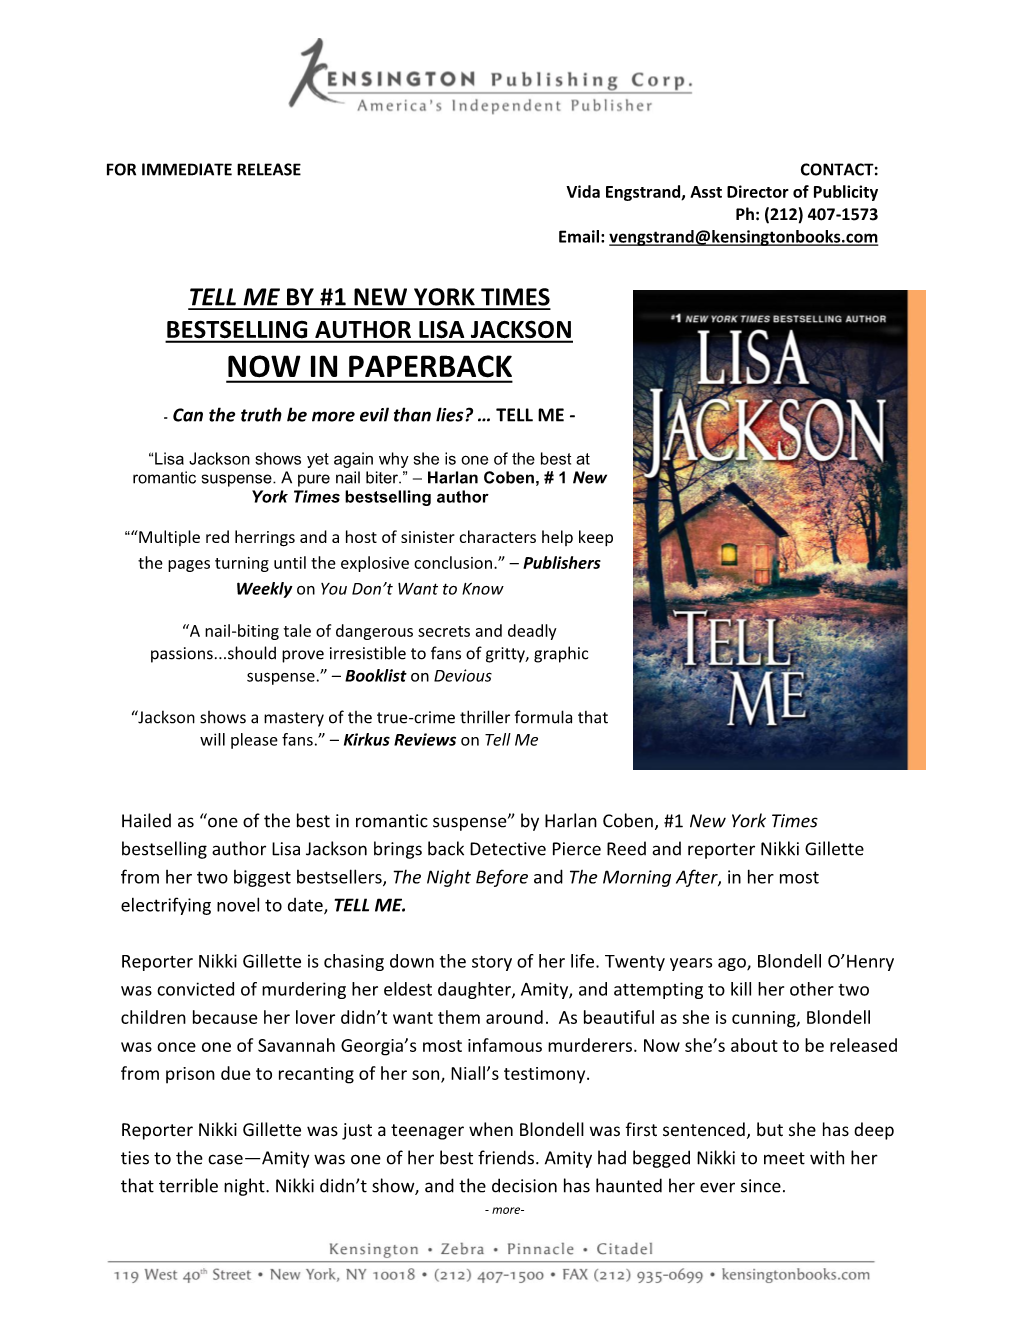 Tell Me by #1 New York Times Bestselling Author Lisa Jackson Now in Paperback